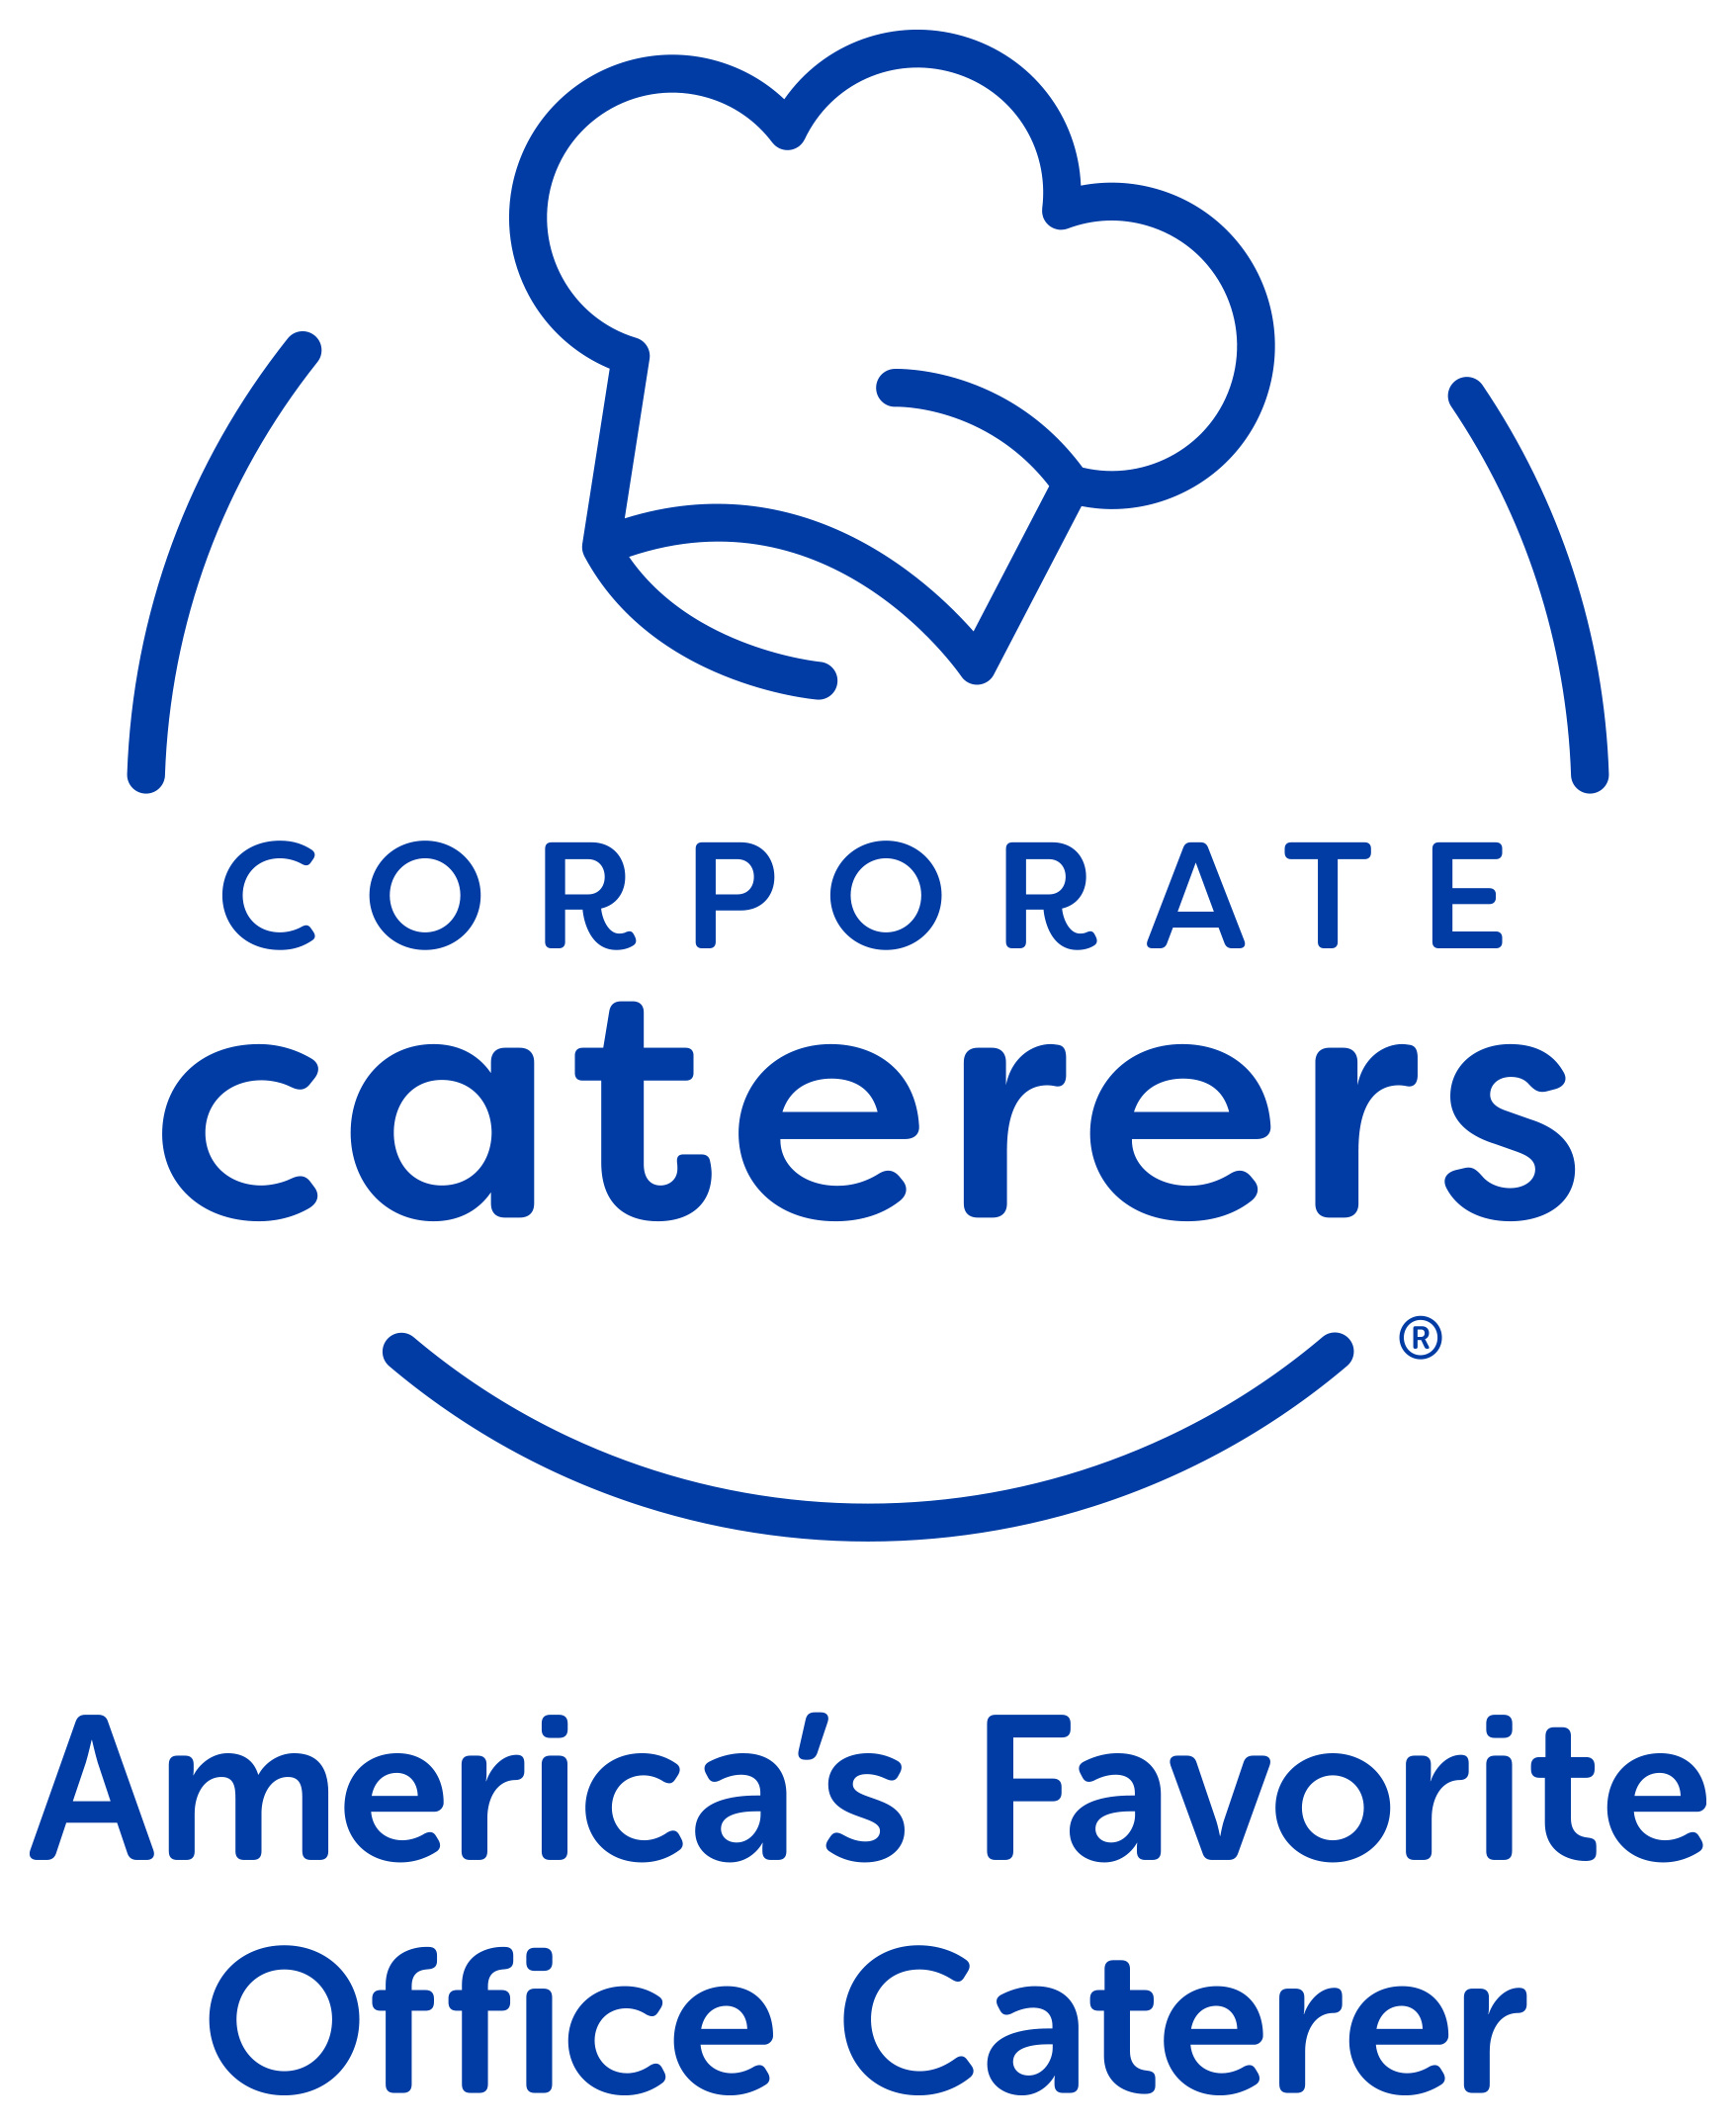 Corporate Caterers: America's Favorite Office Caterer